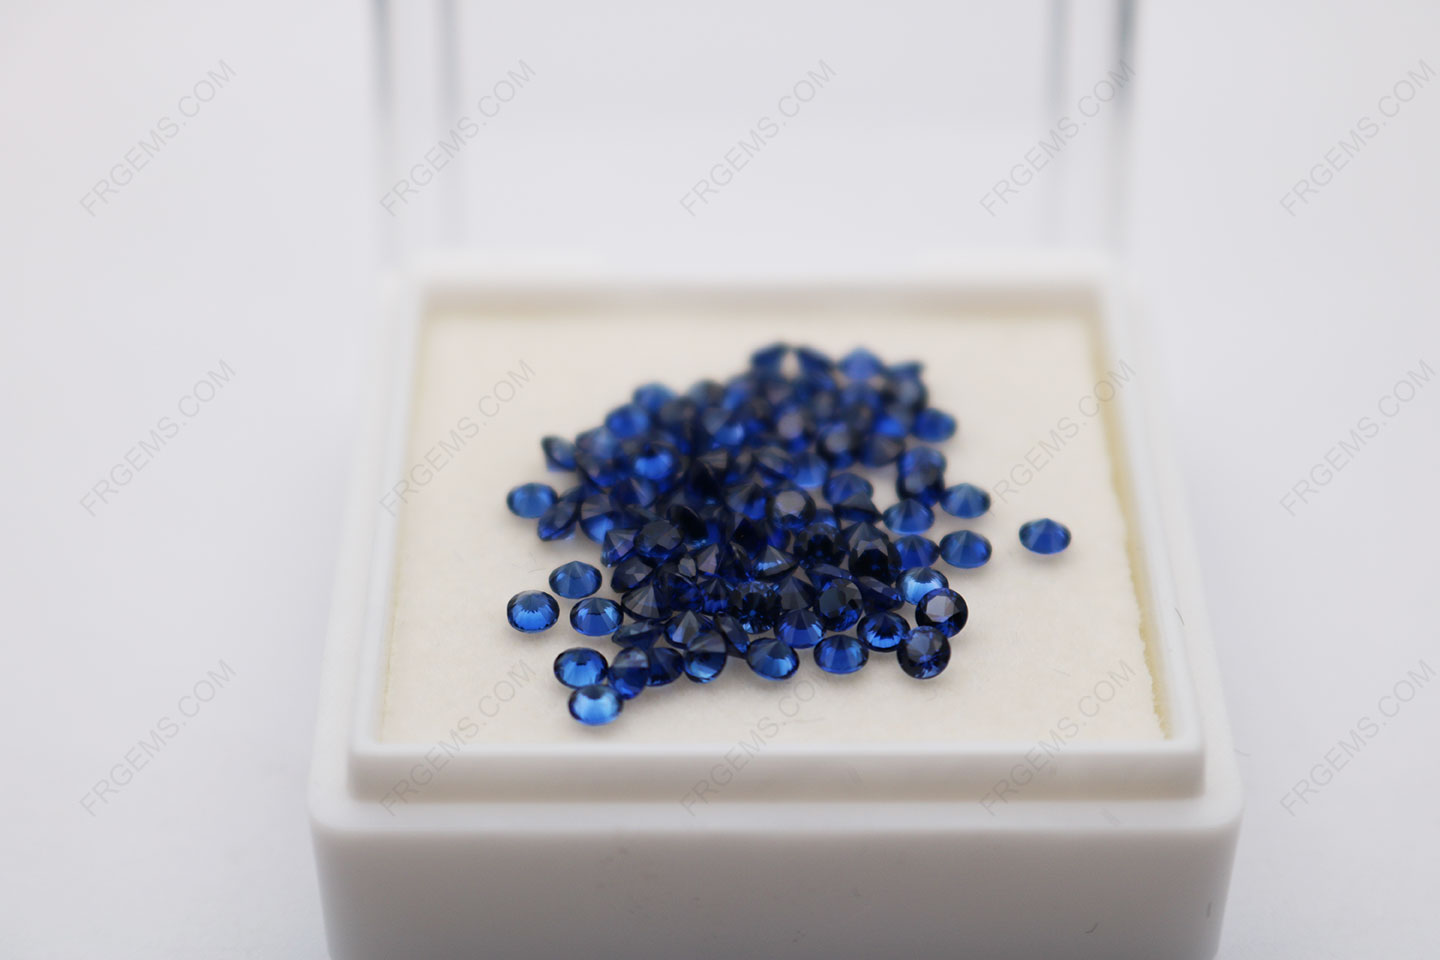 Loose Synthetic Corundum Blue Sapphire 33# light color Round Shape Faceted Cut 2mm stones IMG_2941